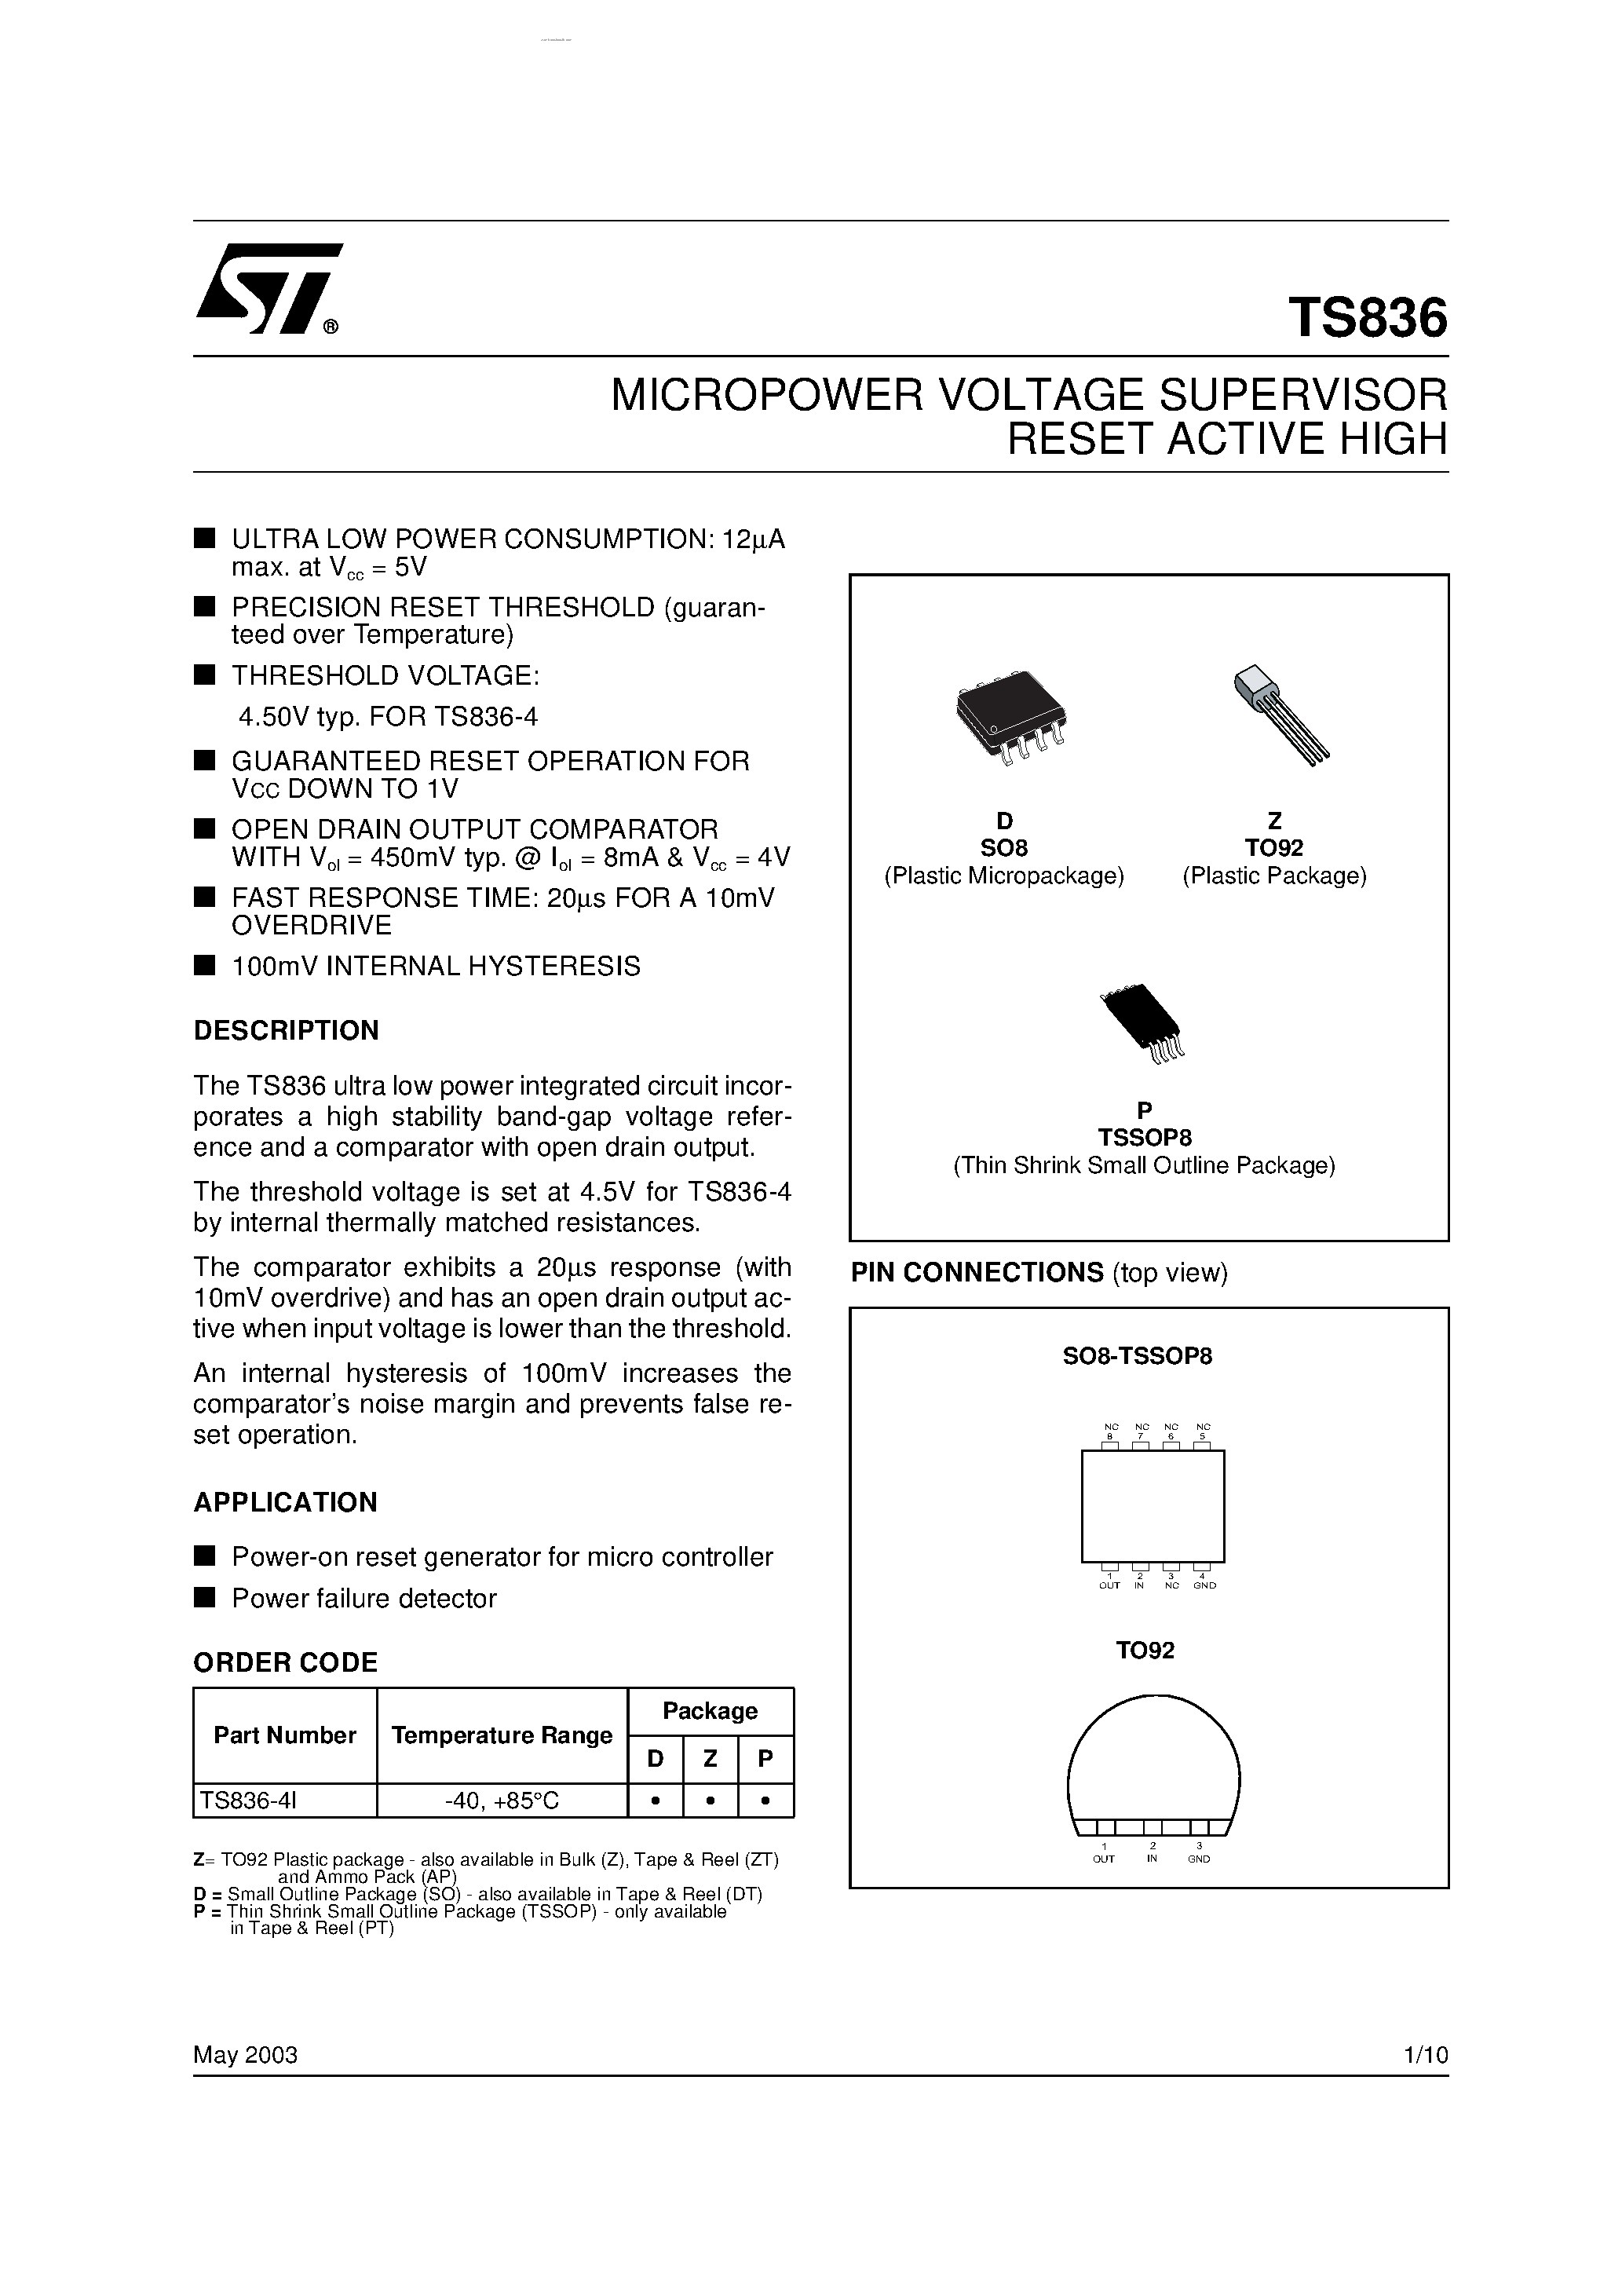 Datasheet TS836 - MICROPOWER VOLTAGE SUPERVISOR RESET ACTIVE HIGH page 1